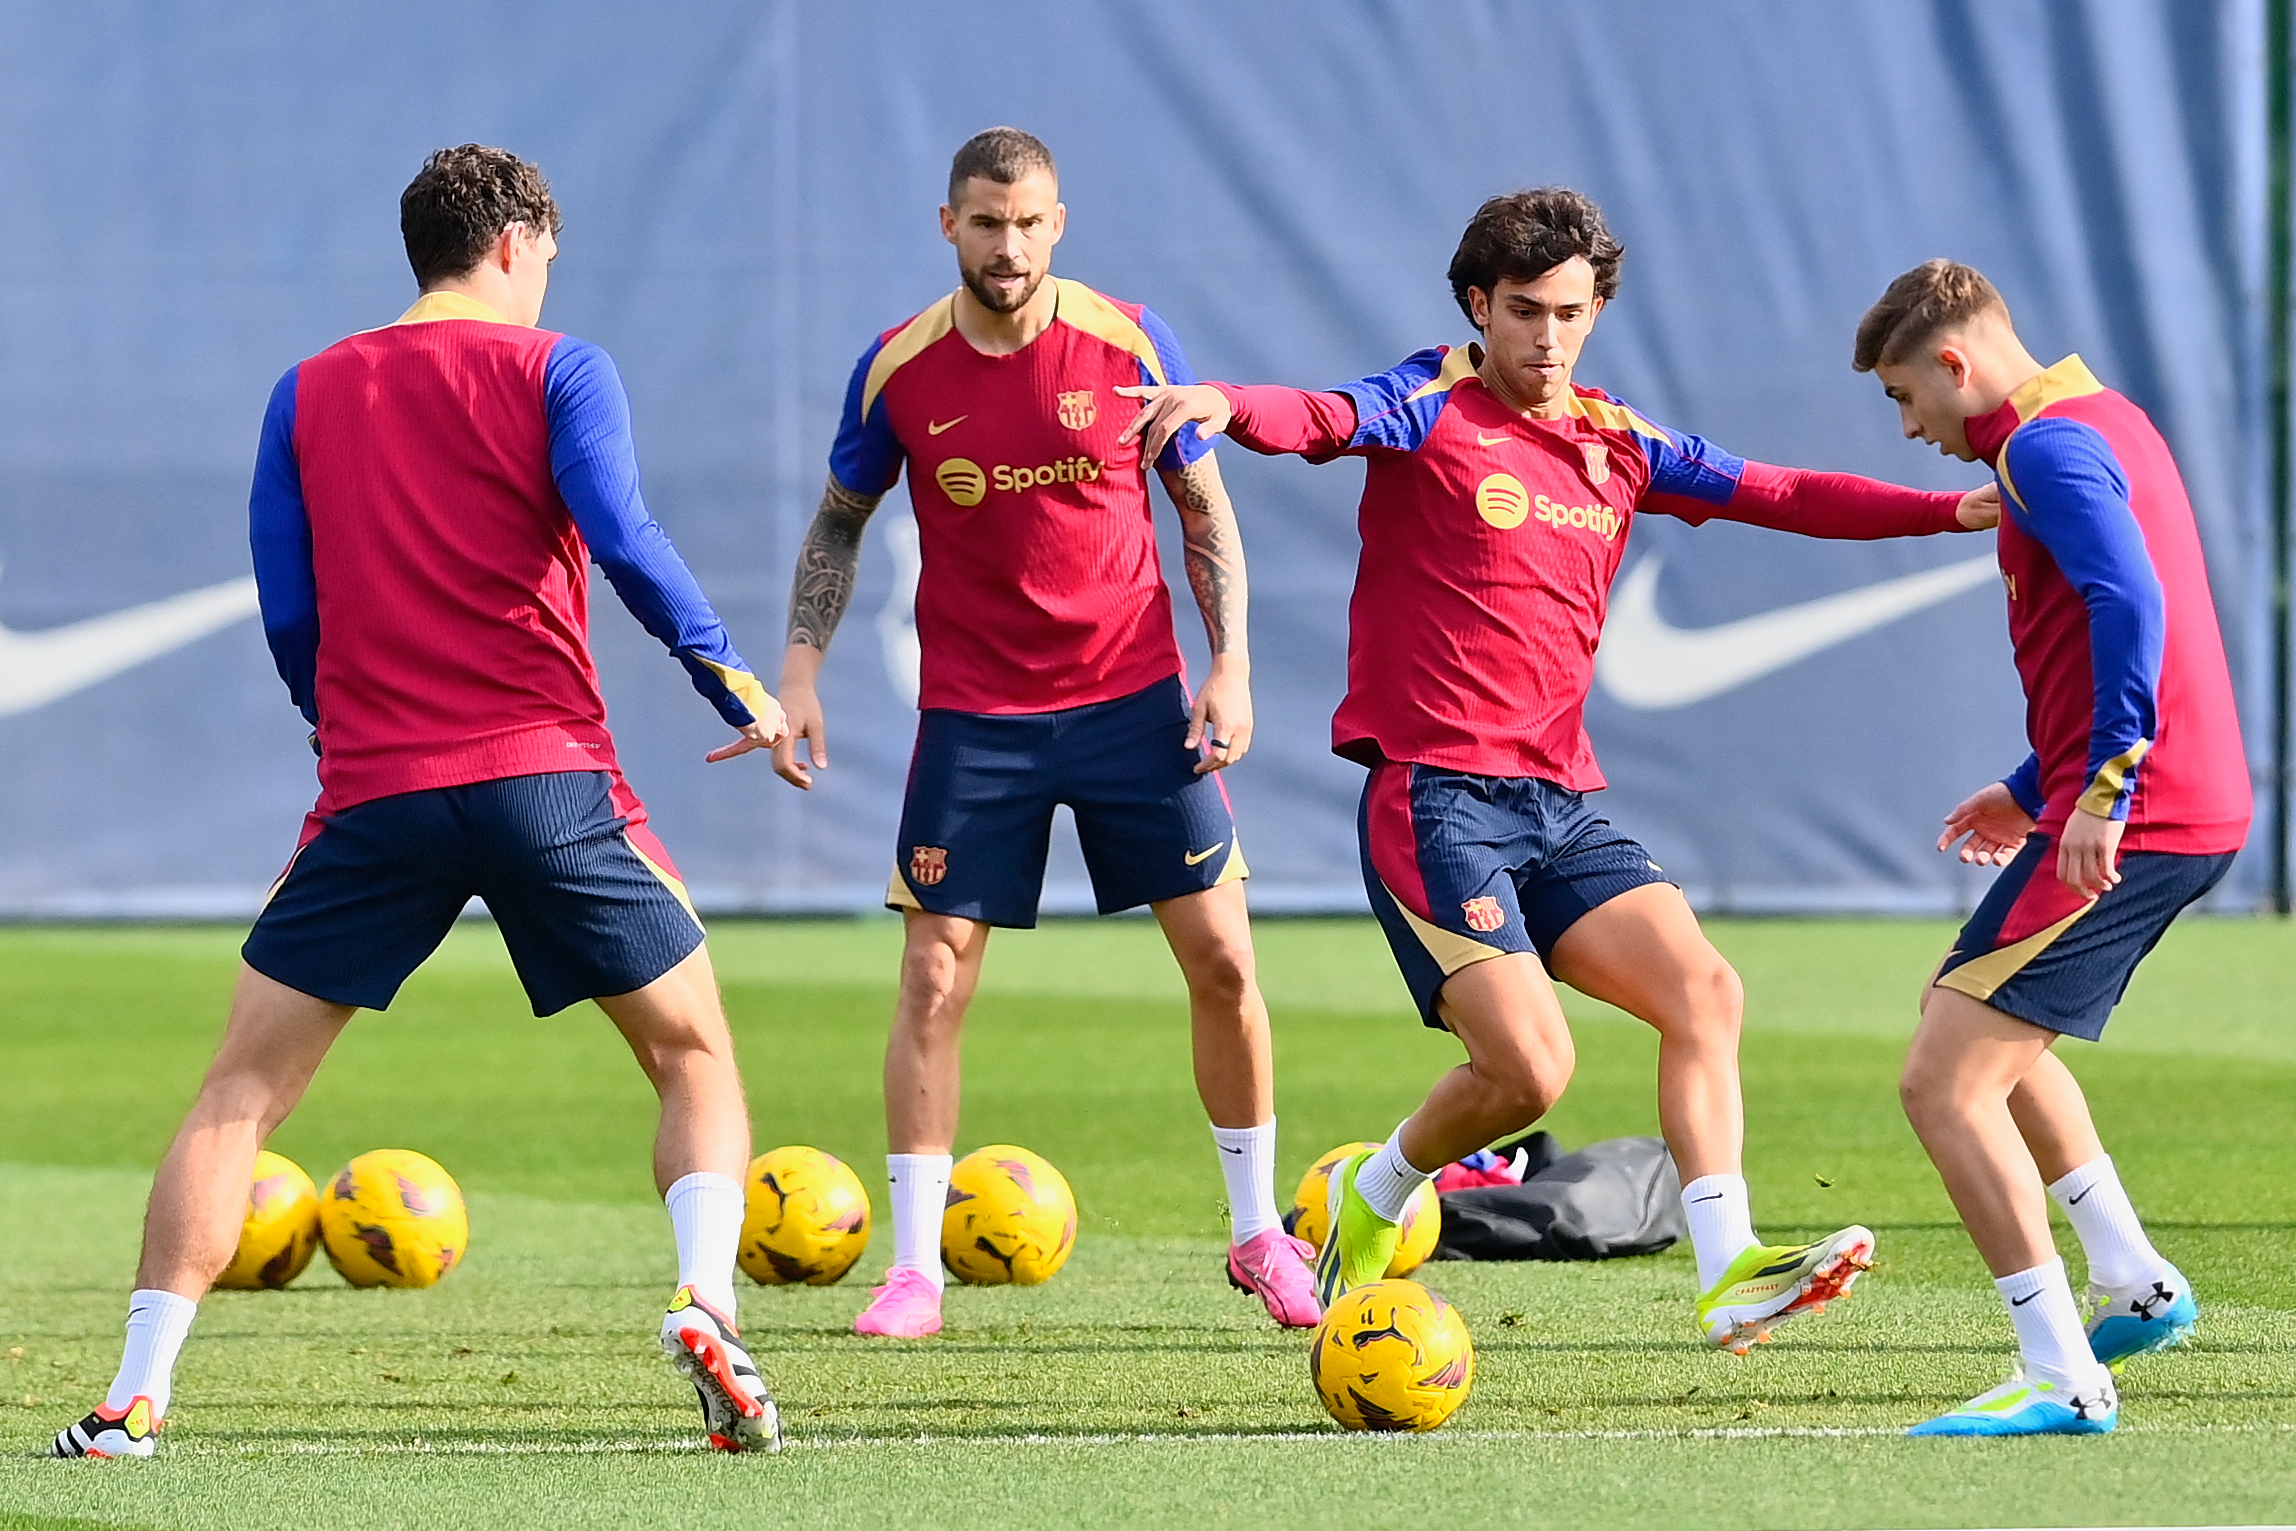 Barcelona's Portuguese forward #14 Joao Felix (C) and teammates attend a training session at the Joan Gamper training ground in Sant Joan Despi, near Barcelona, on January 30, 2024. Only a few months after lifting the Spanish title, Barcelona coach Xavi Hernandez dramatically announced he would walk away from the club at the end of the season. After Villarreal stunned Barcelona on January 28 with a 5-3 win which left the champions third, and 10 points behind La Liga leaders Real Madrid, Xavi said he was stepping down in June.